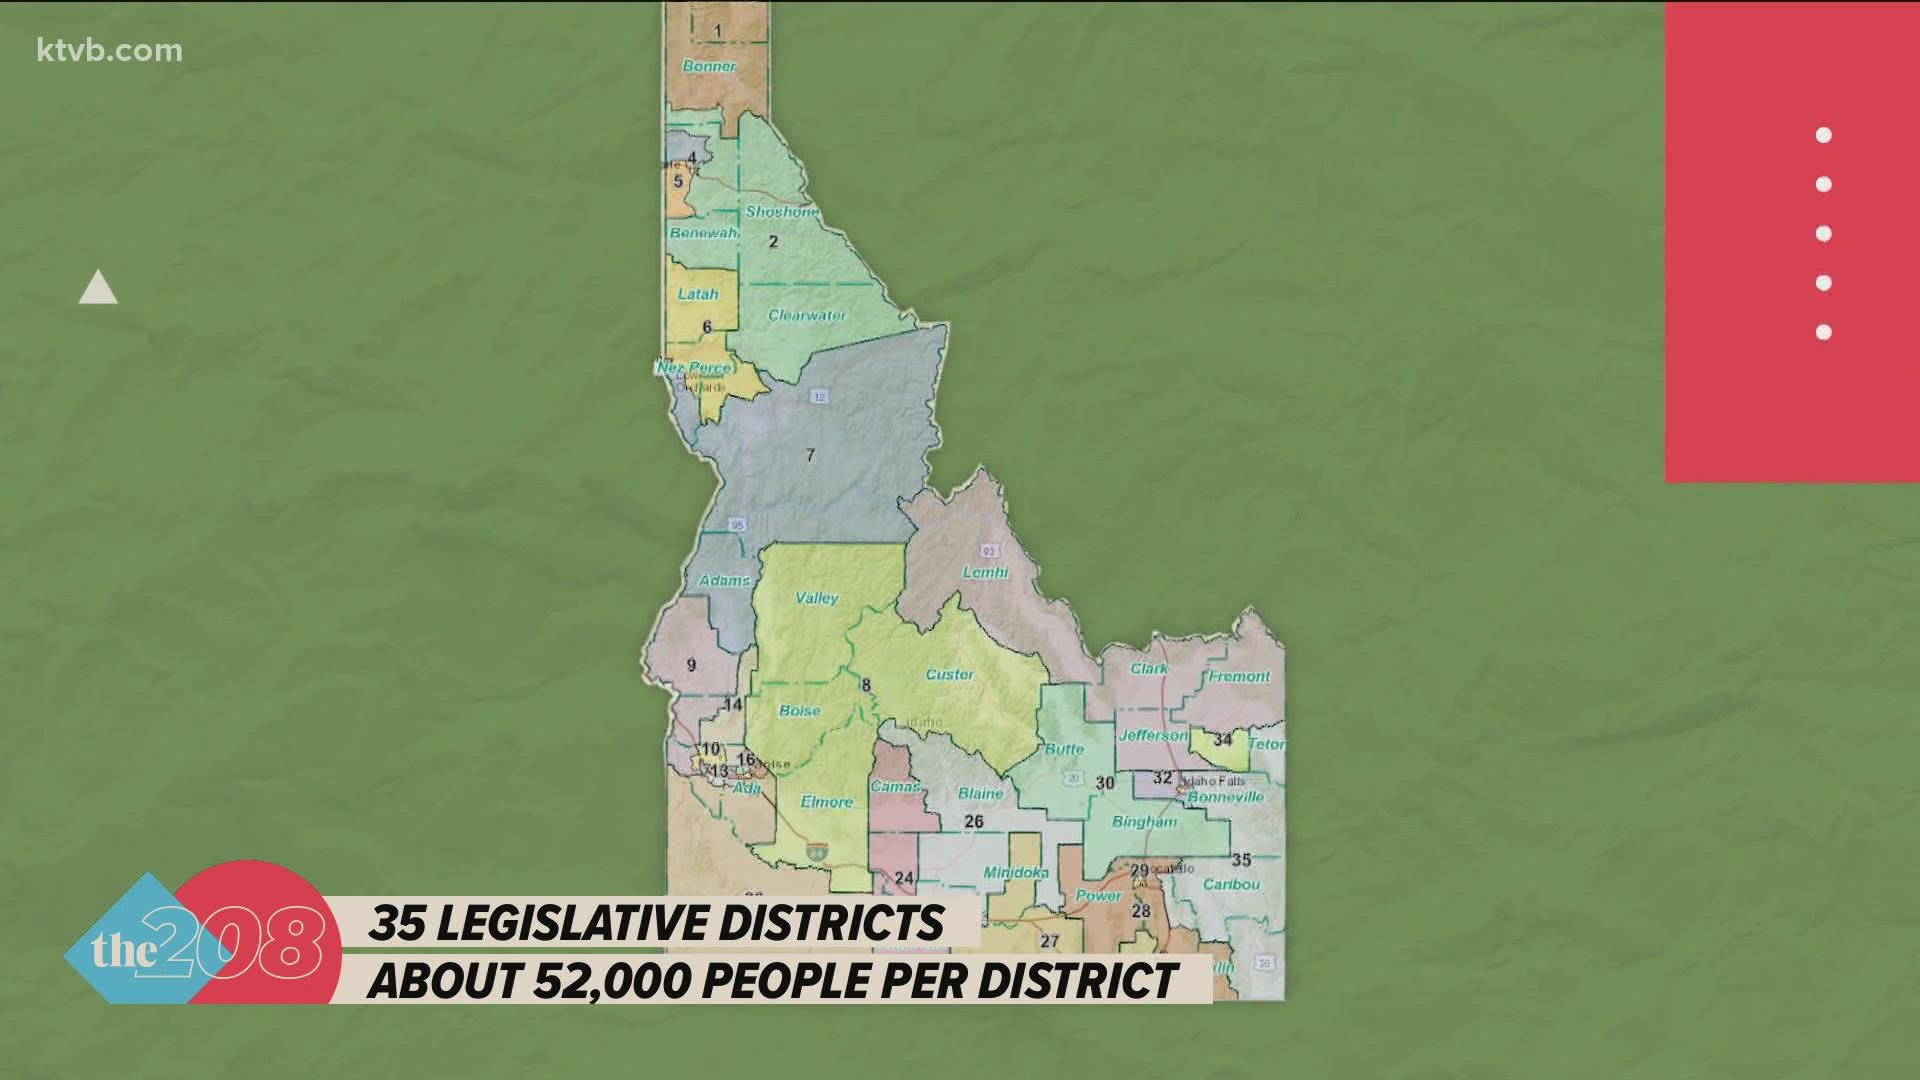 The bipartisan redistricting commission on Friday unanimously approved new district lines for the Idaho Legislature, but was split on the congressional plan.